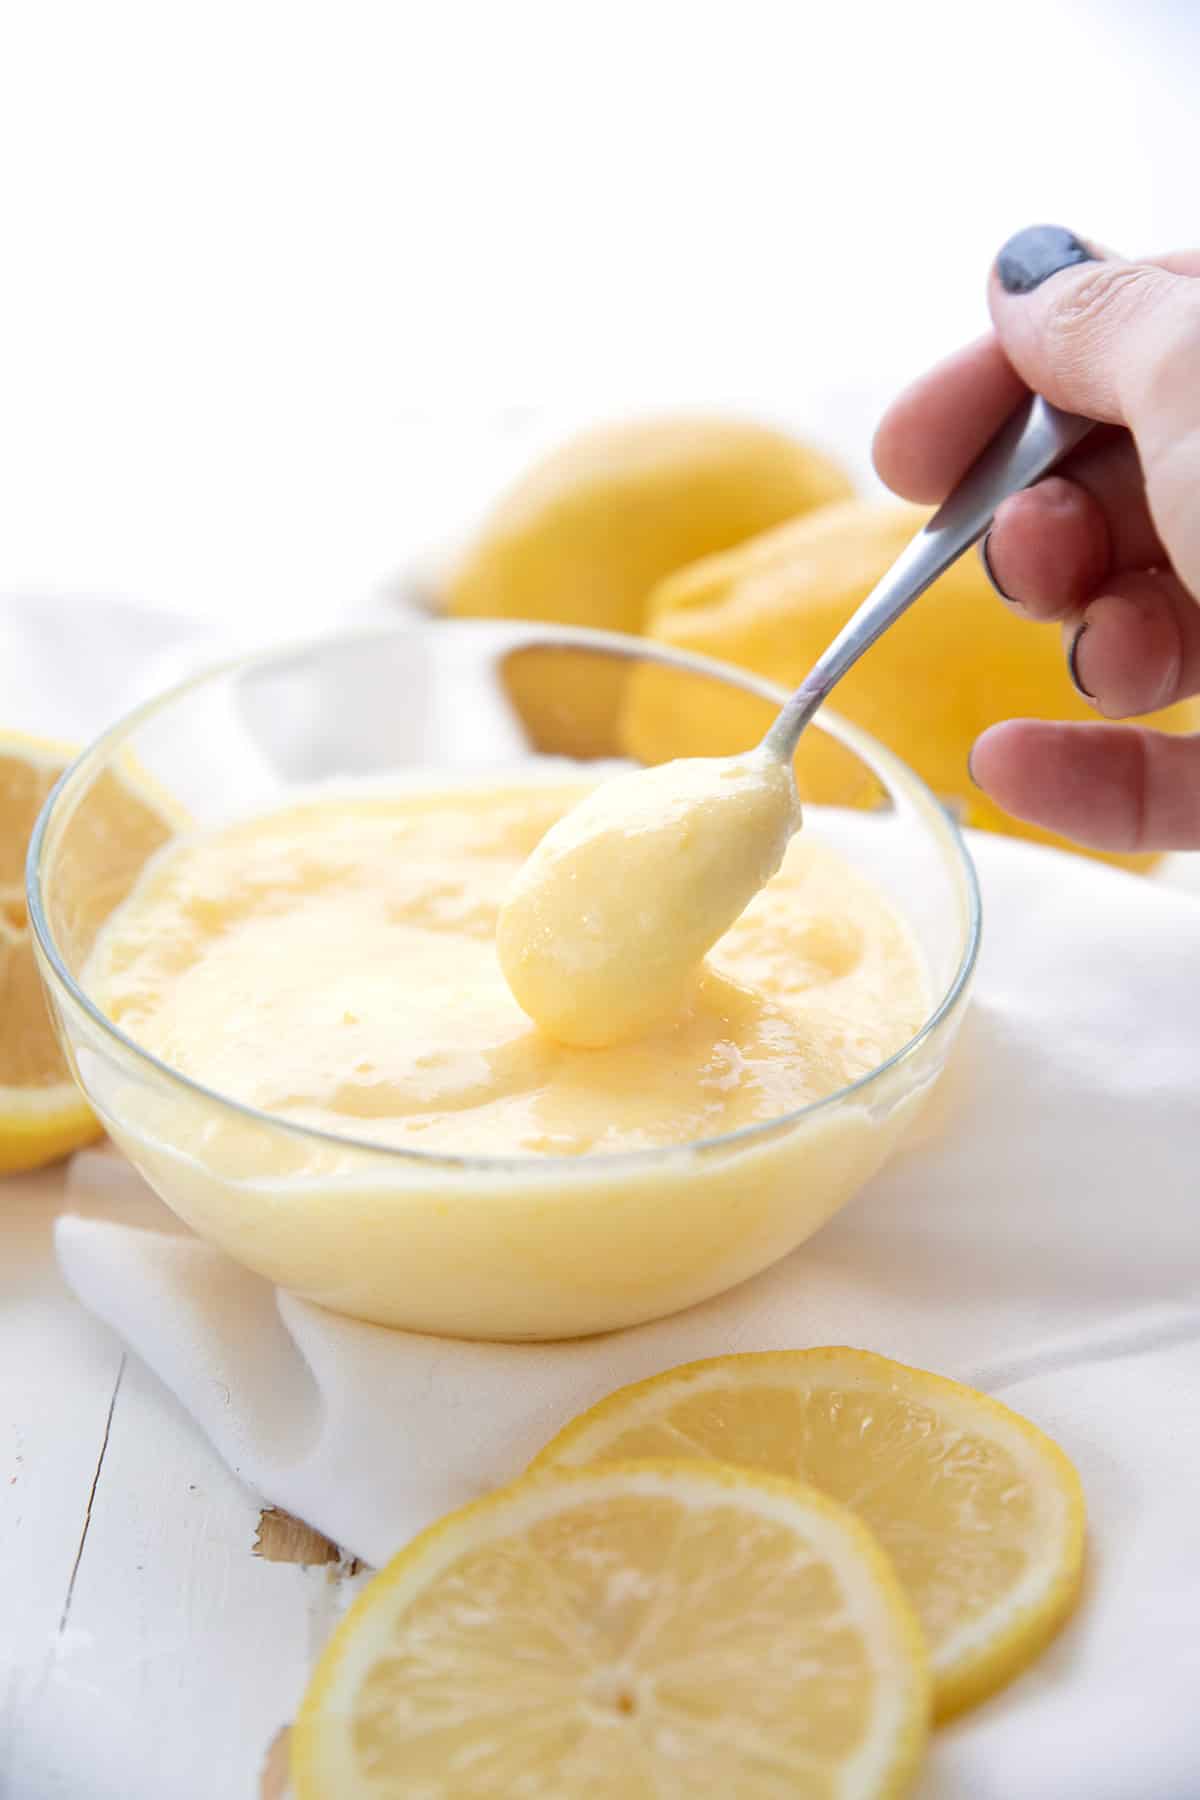 A hand spooning keto lemon curd out of a glass bowl.